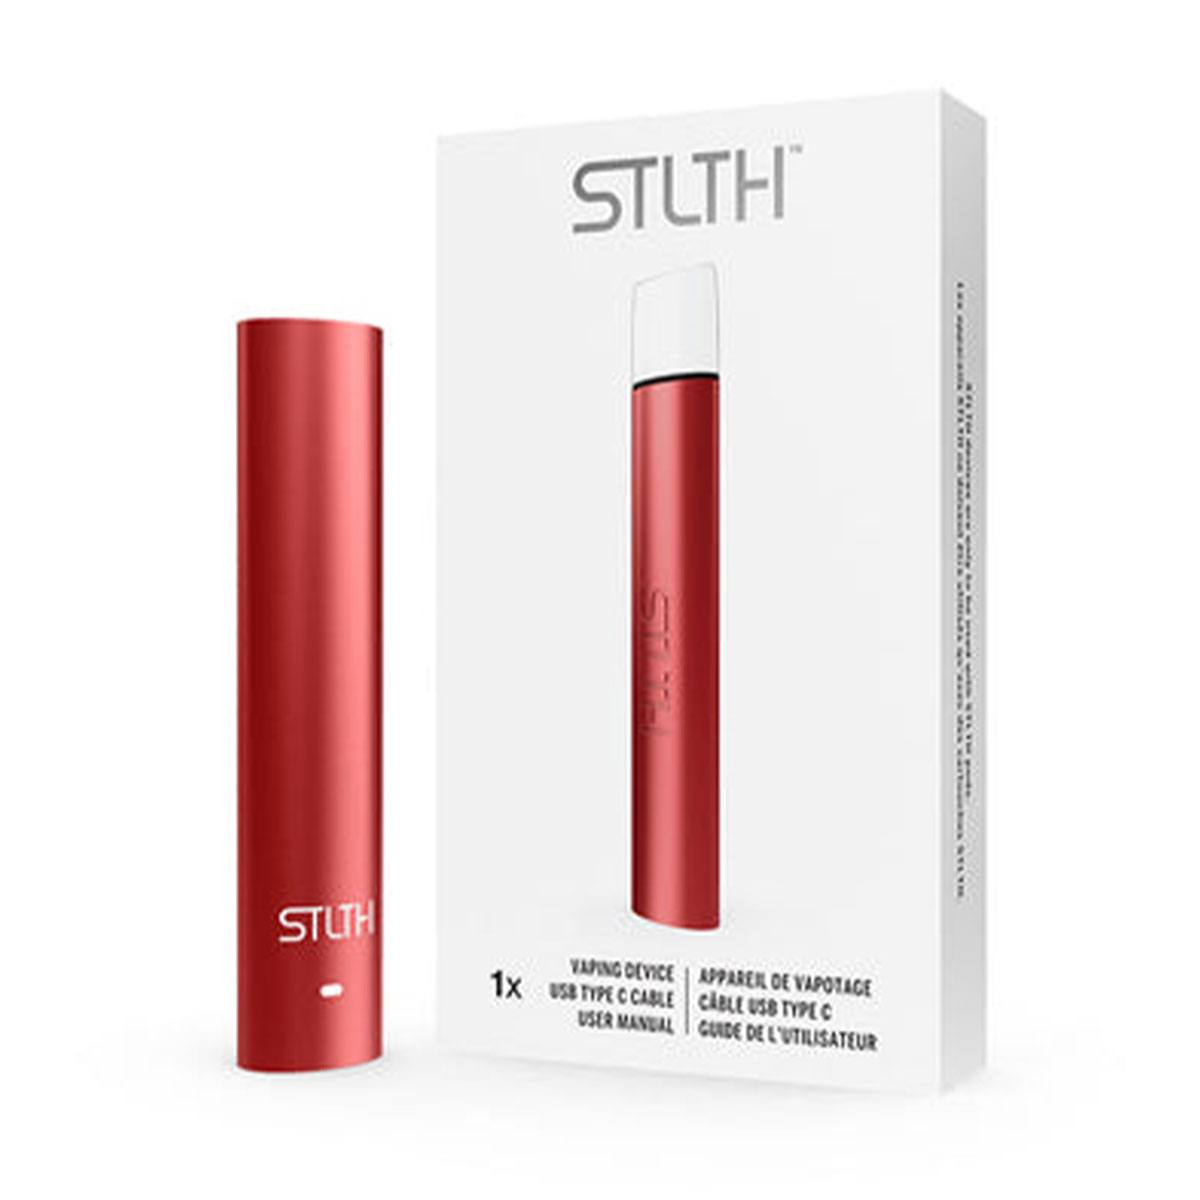 STLTH - Type-C Device Pod System STLTH Red Metal 